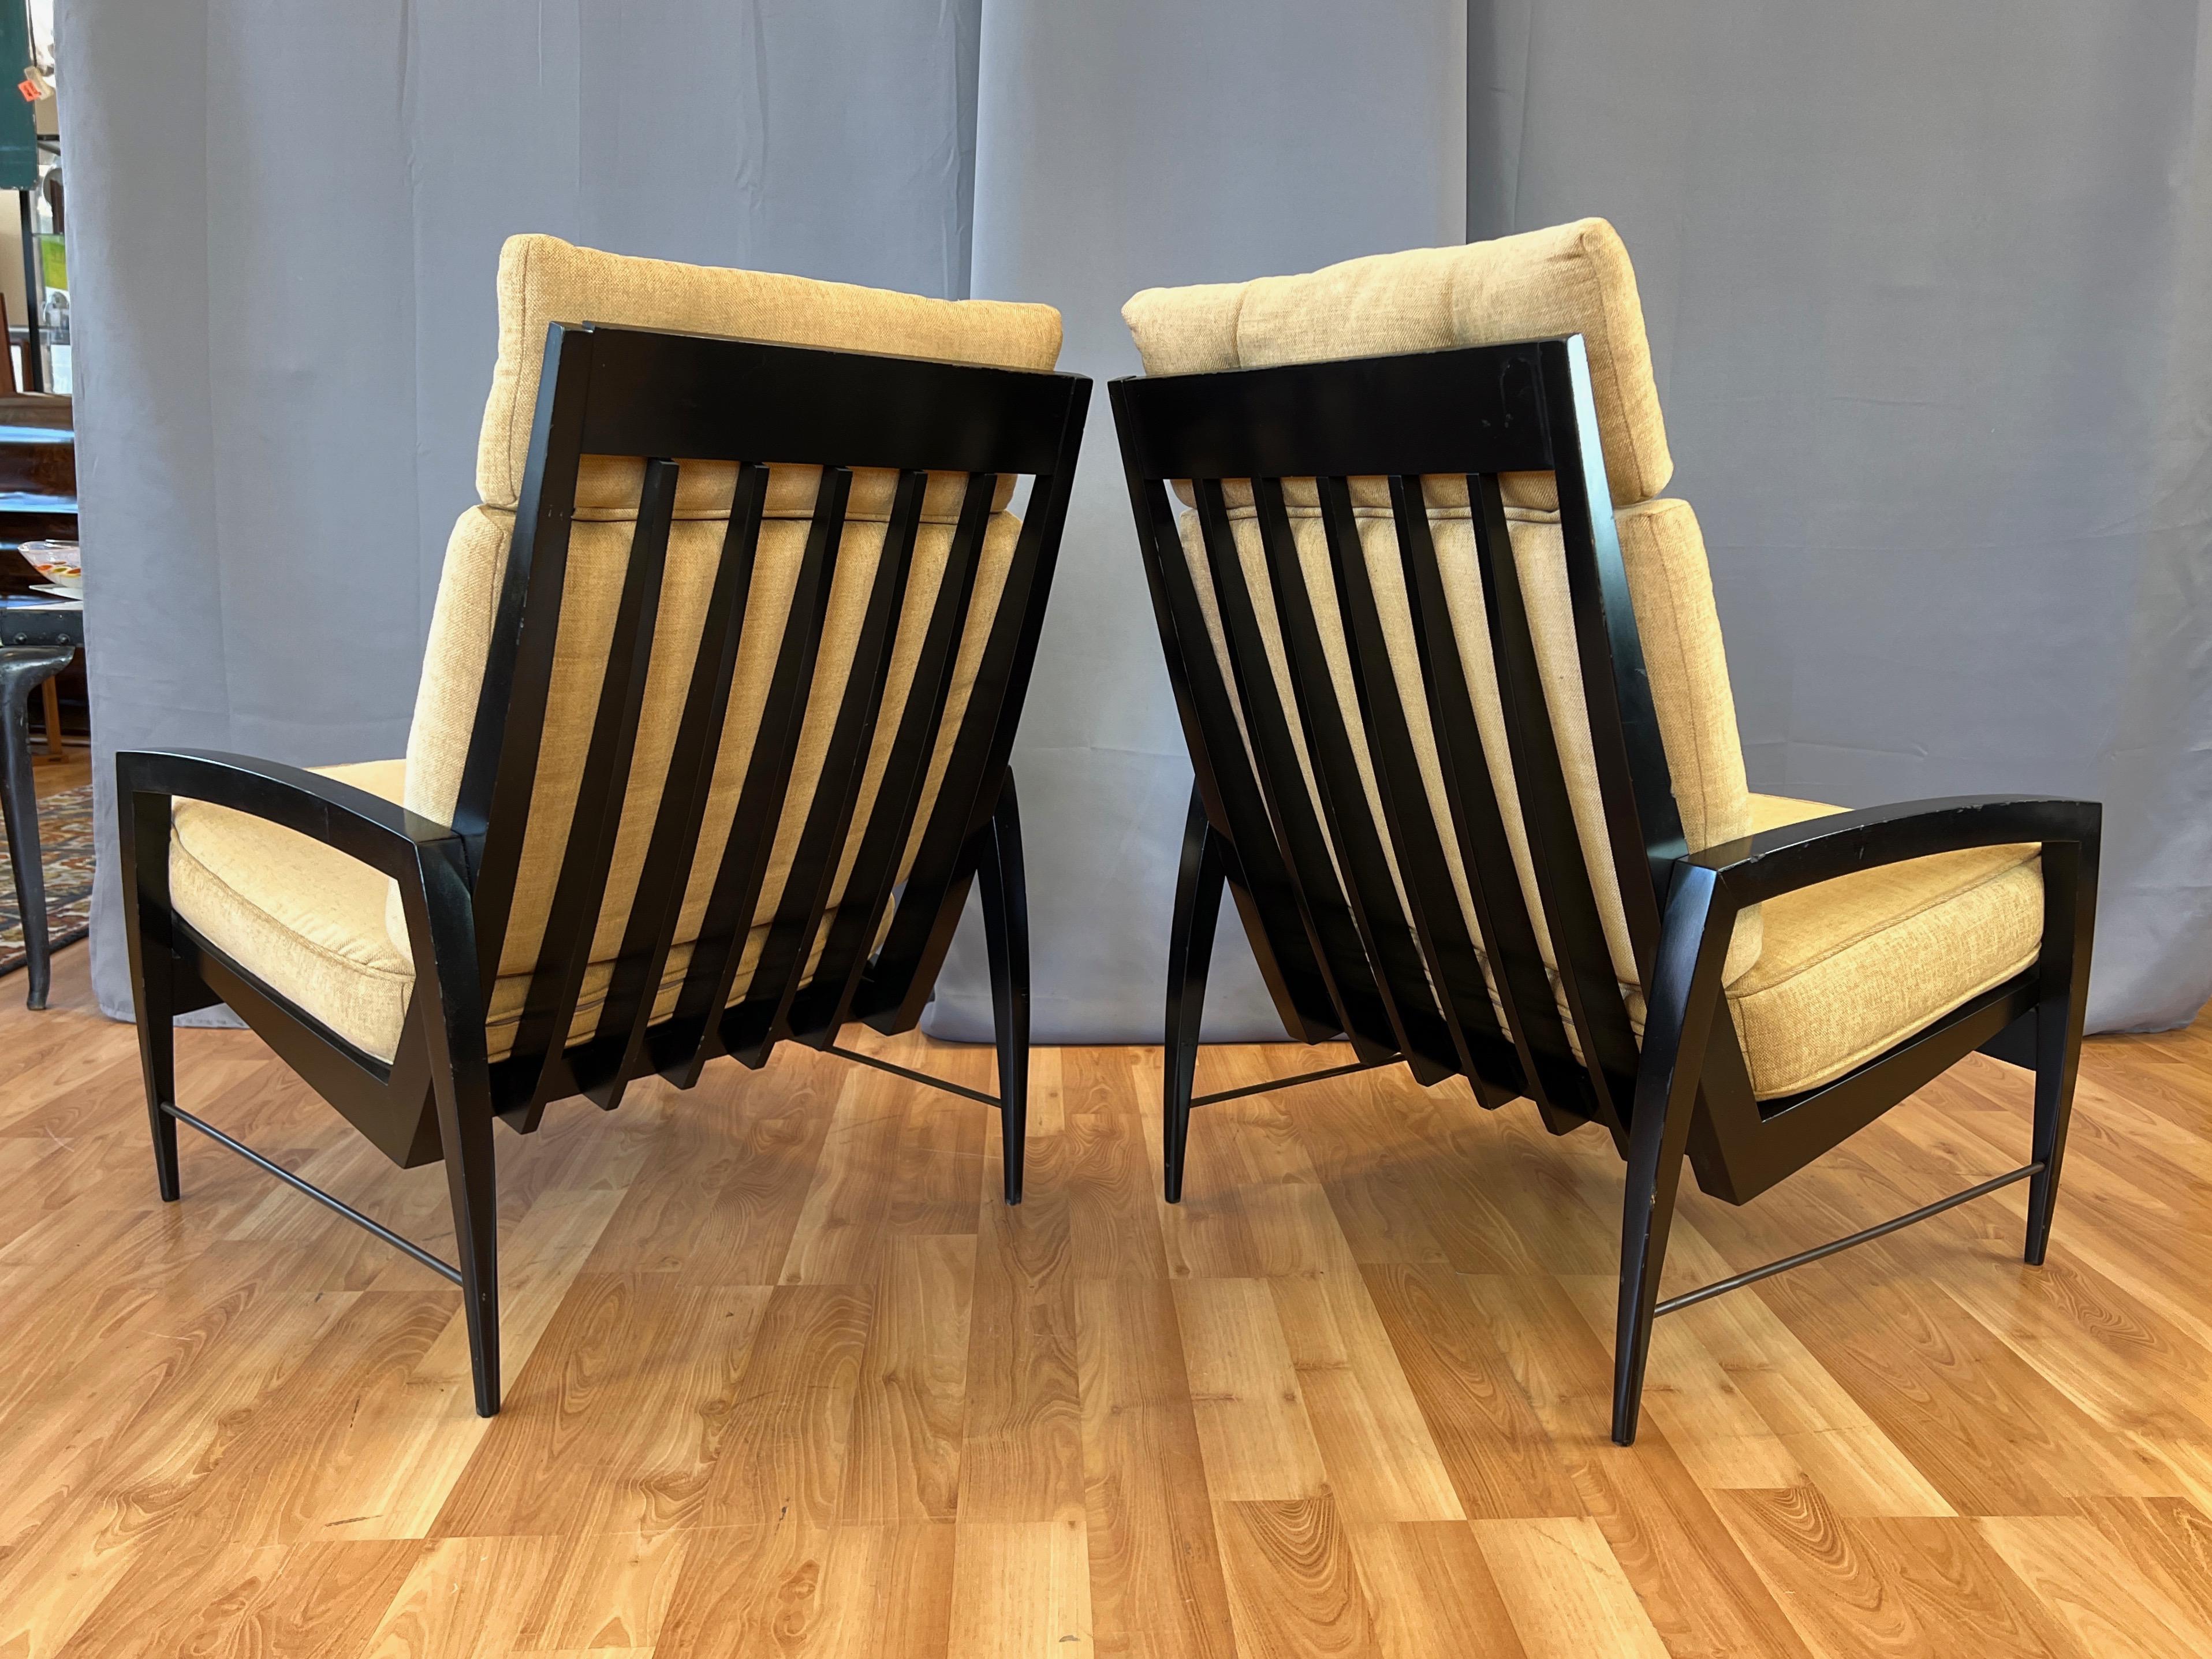 Pair of Dan Johnson for Selig Black Lacquered High-Back Lounge Chairs, 1950s For Sale 2